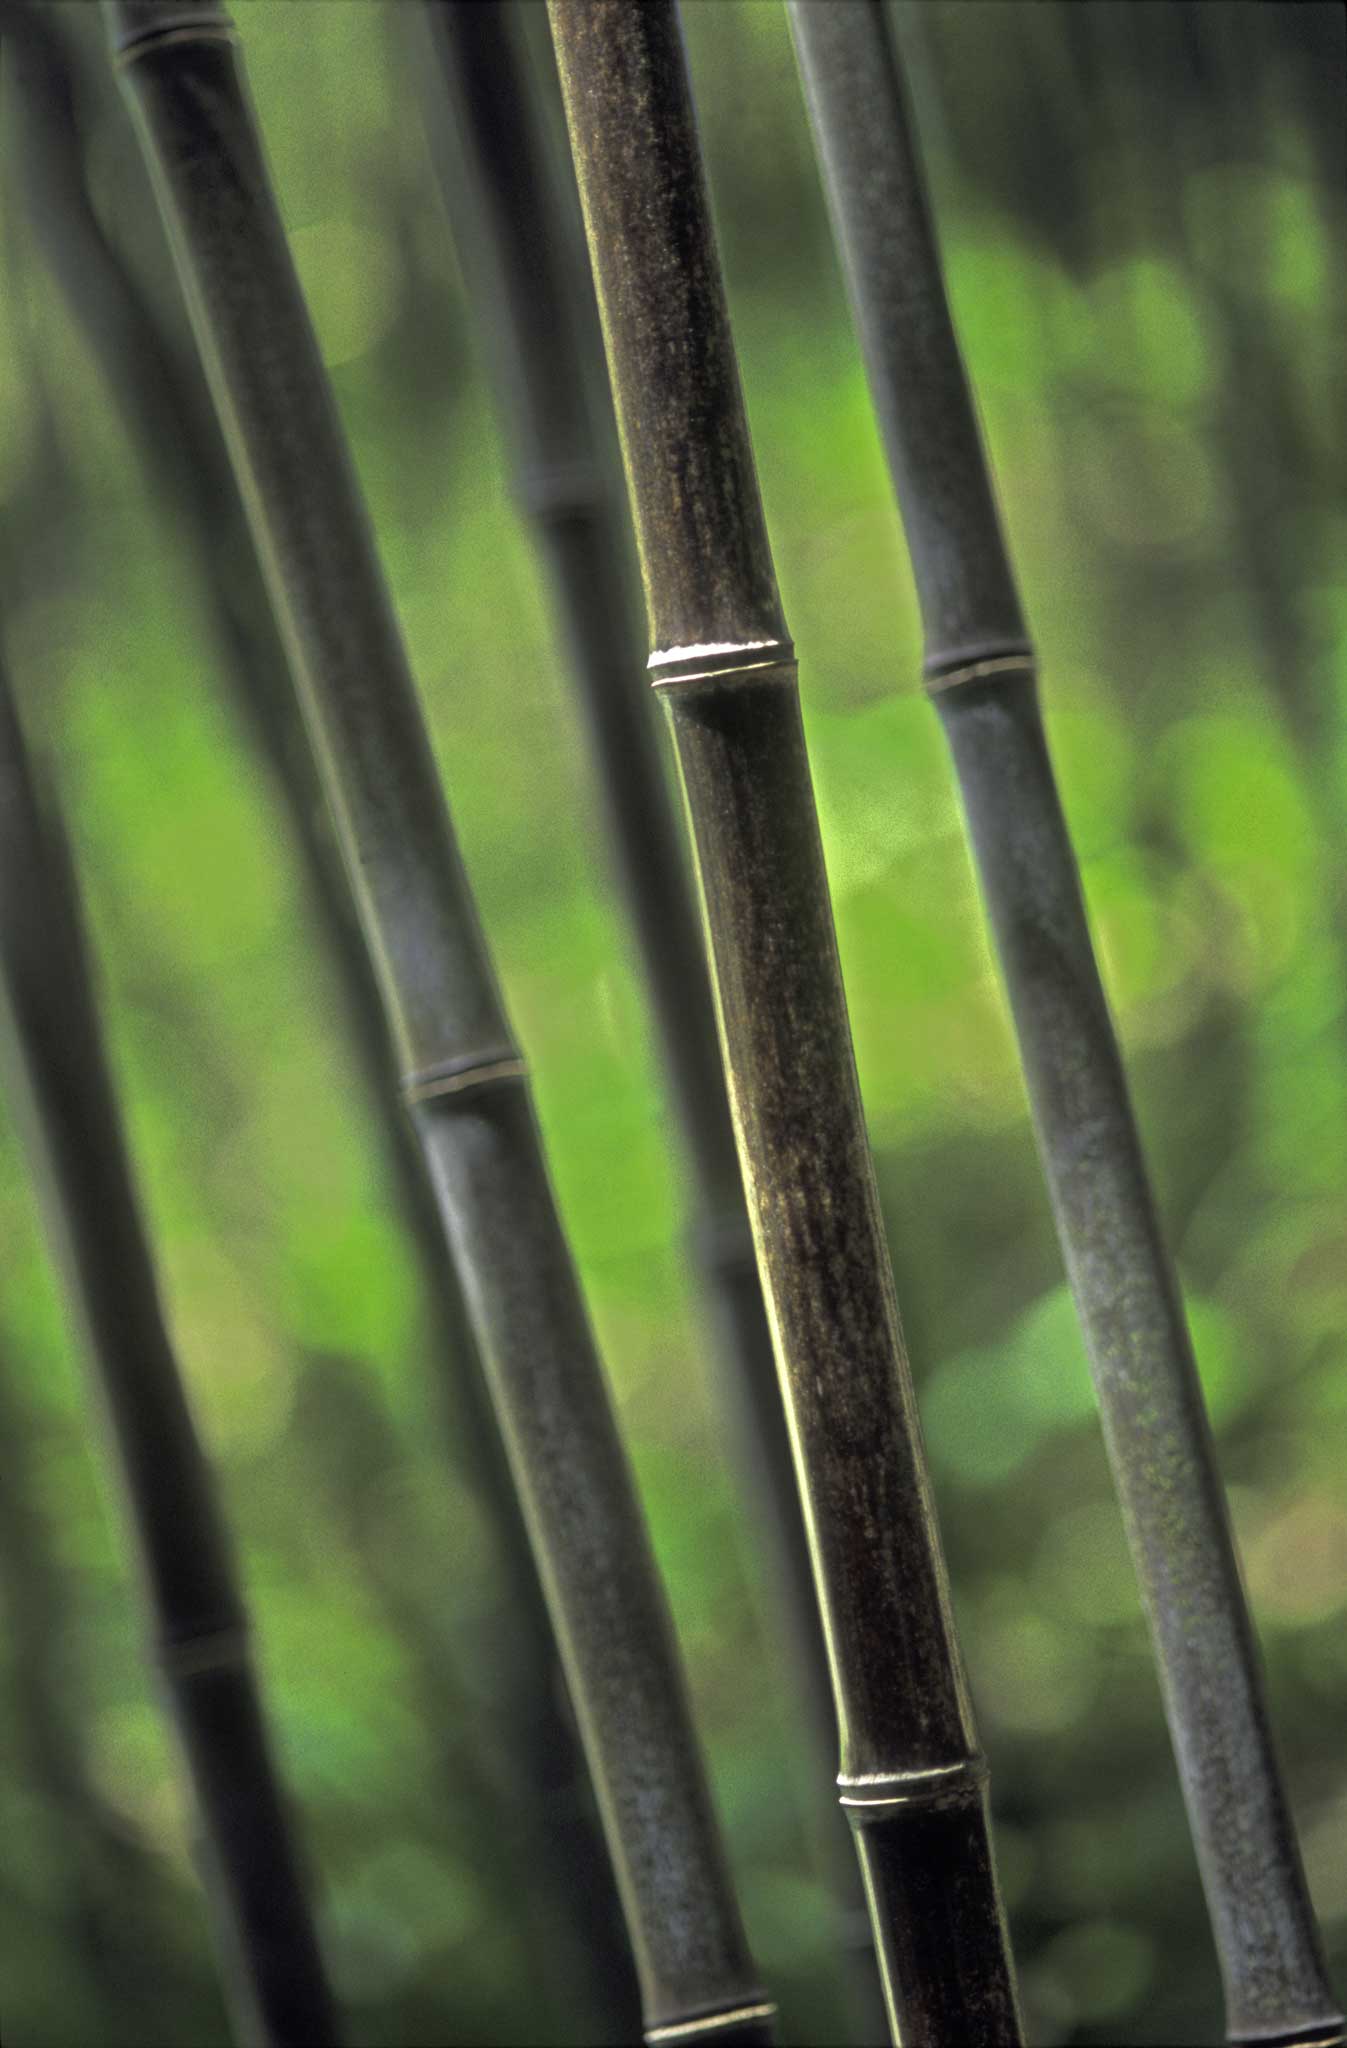 Magical touch: Phyllostachys nigra is the black-caned bamboo that you see in lots of minimalist plots these days